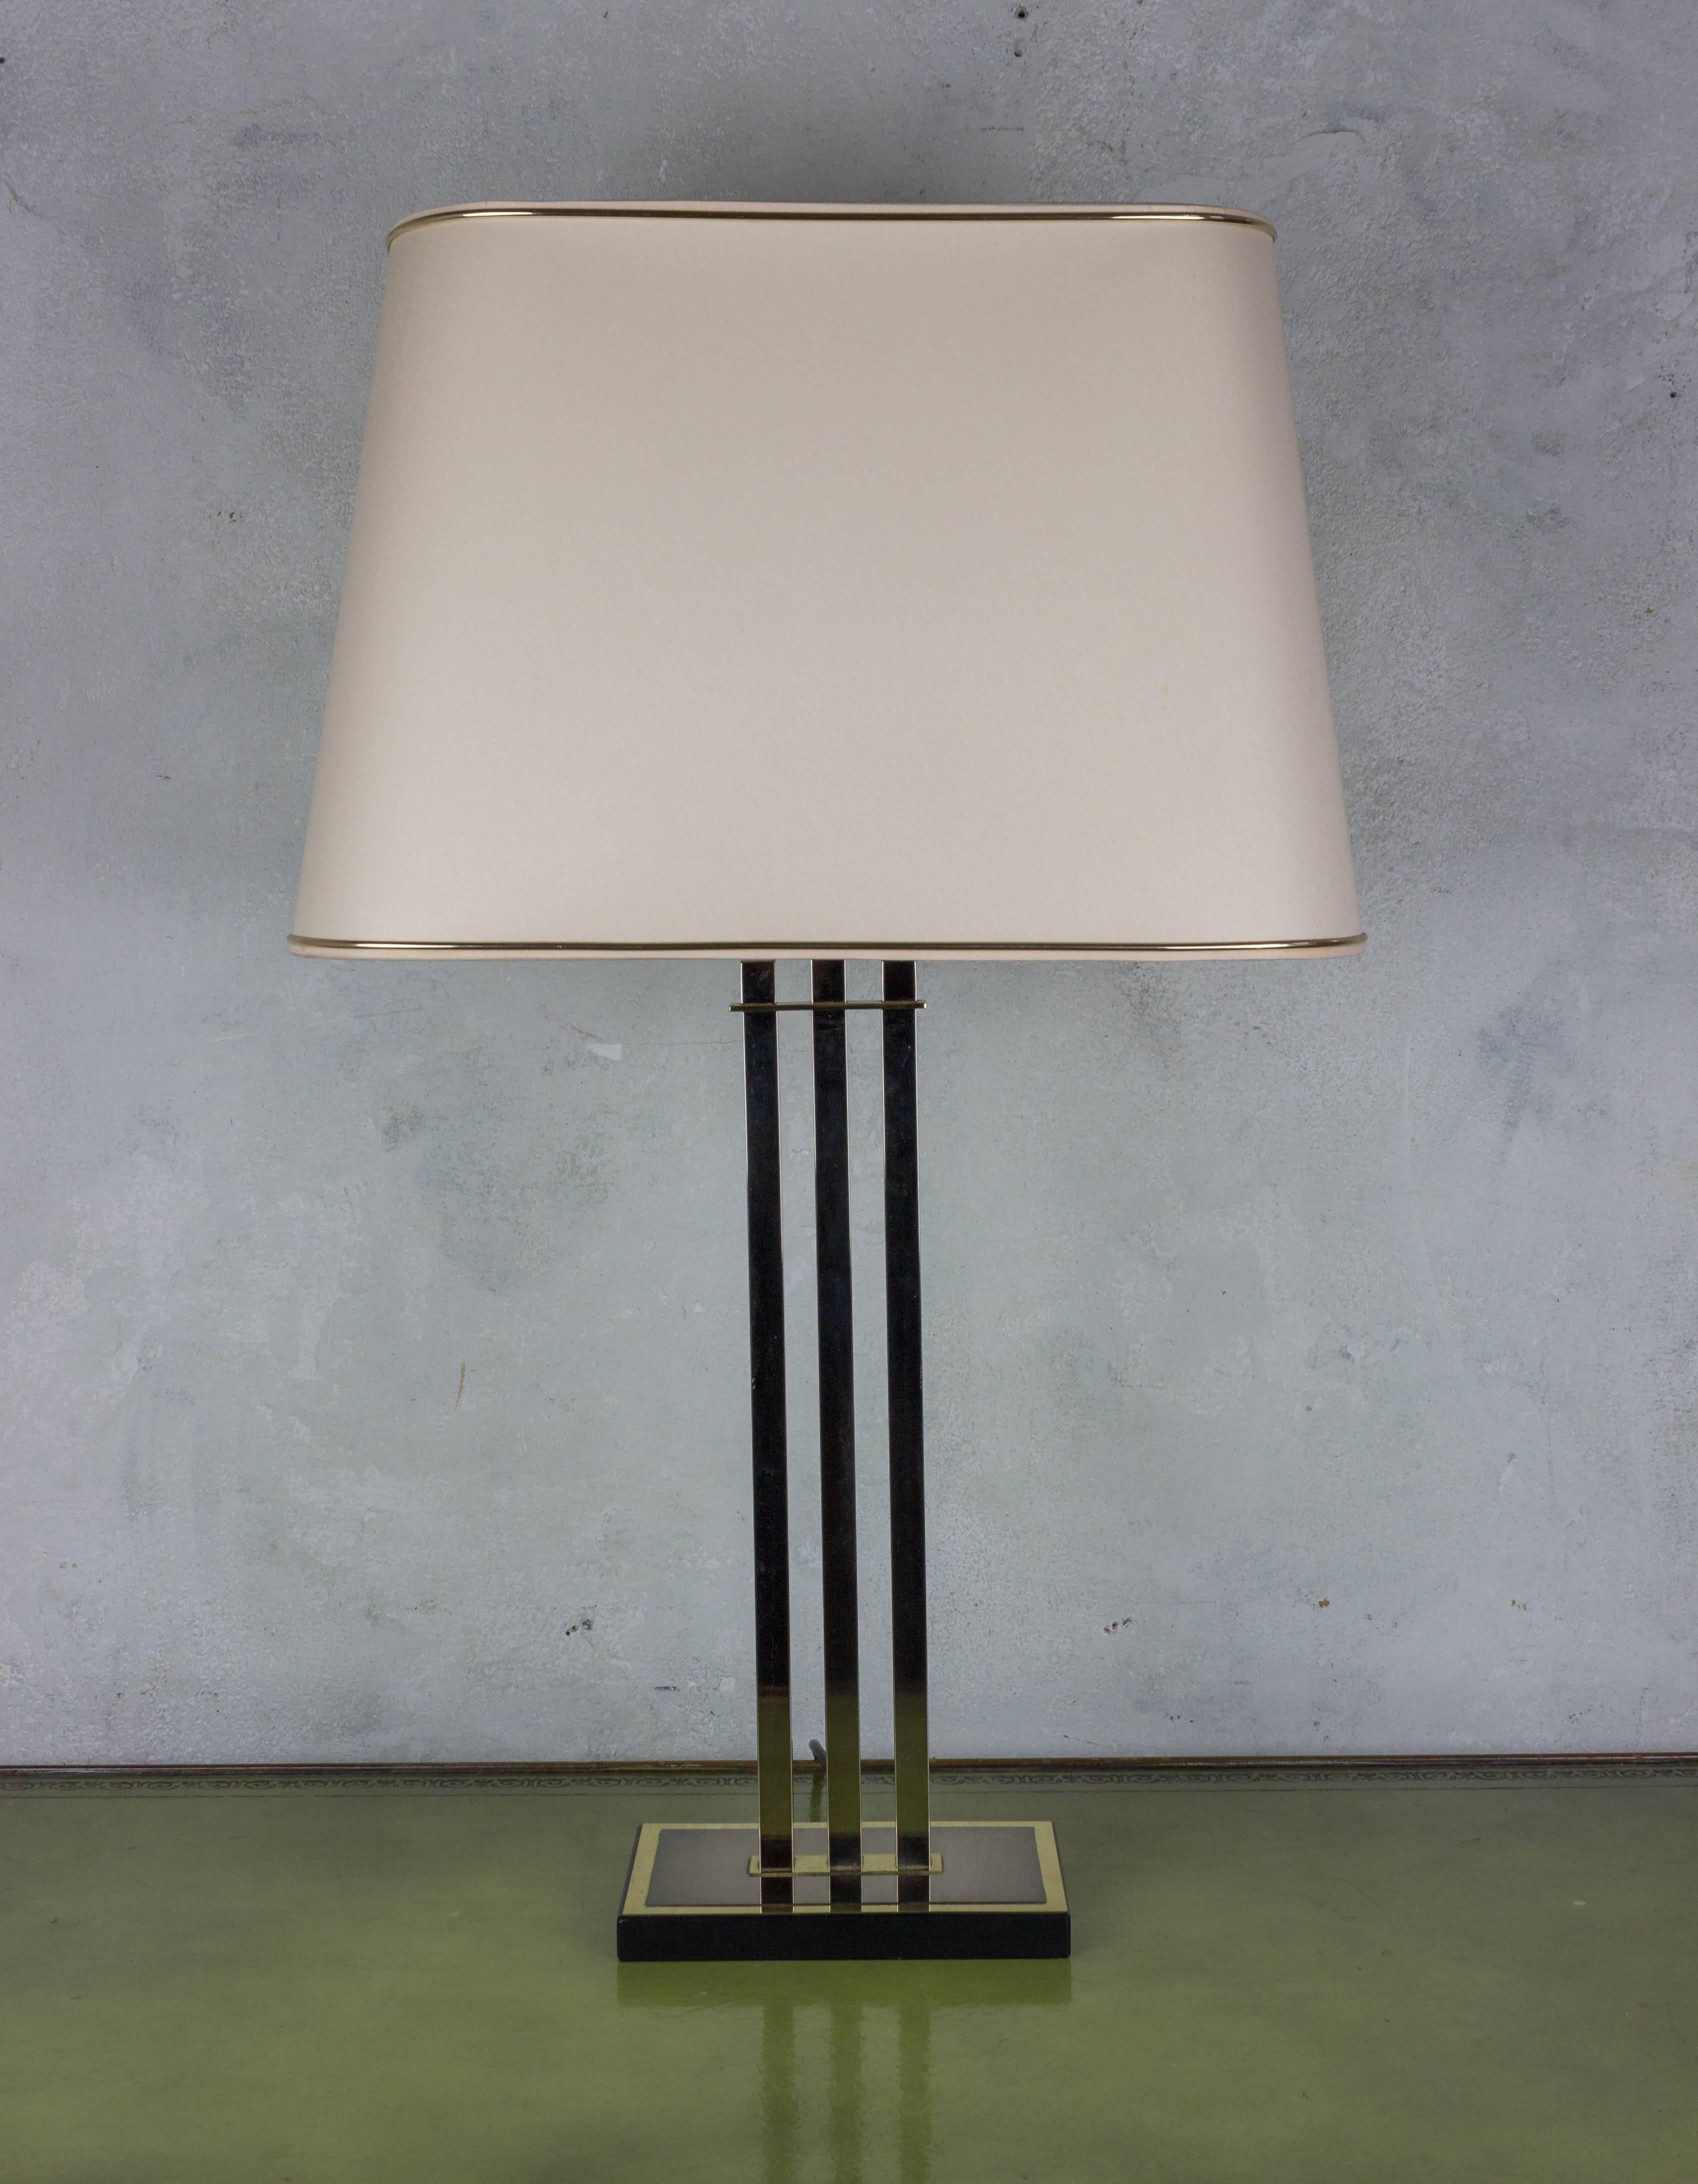 Modernist lamp with three brass vertical supports, mounted on a brass and wood base. Sold with original European shade. French, 1970s. Good vintage condition.

Ref #: LT0215-05

Dimensions: 27.5”H x 8”W x 5”D